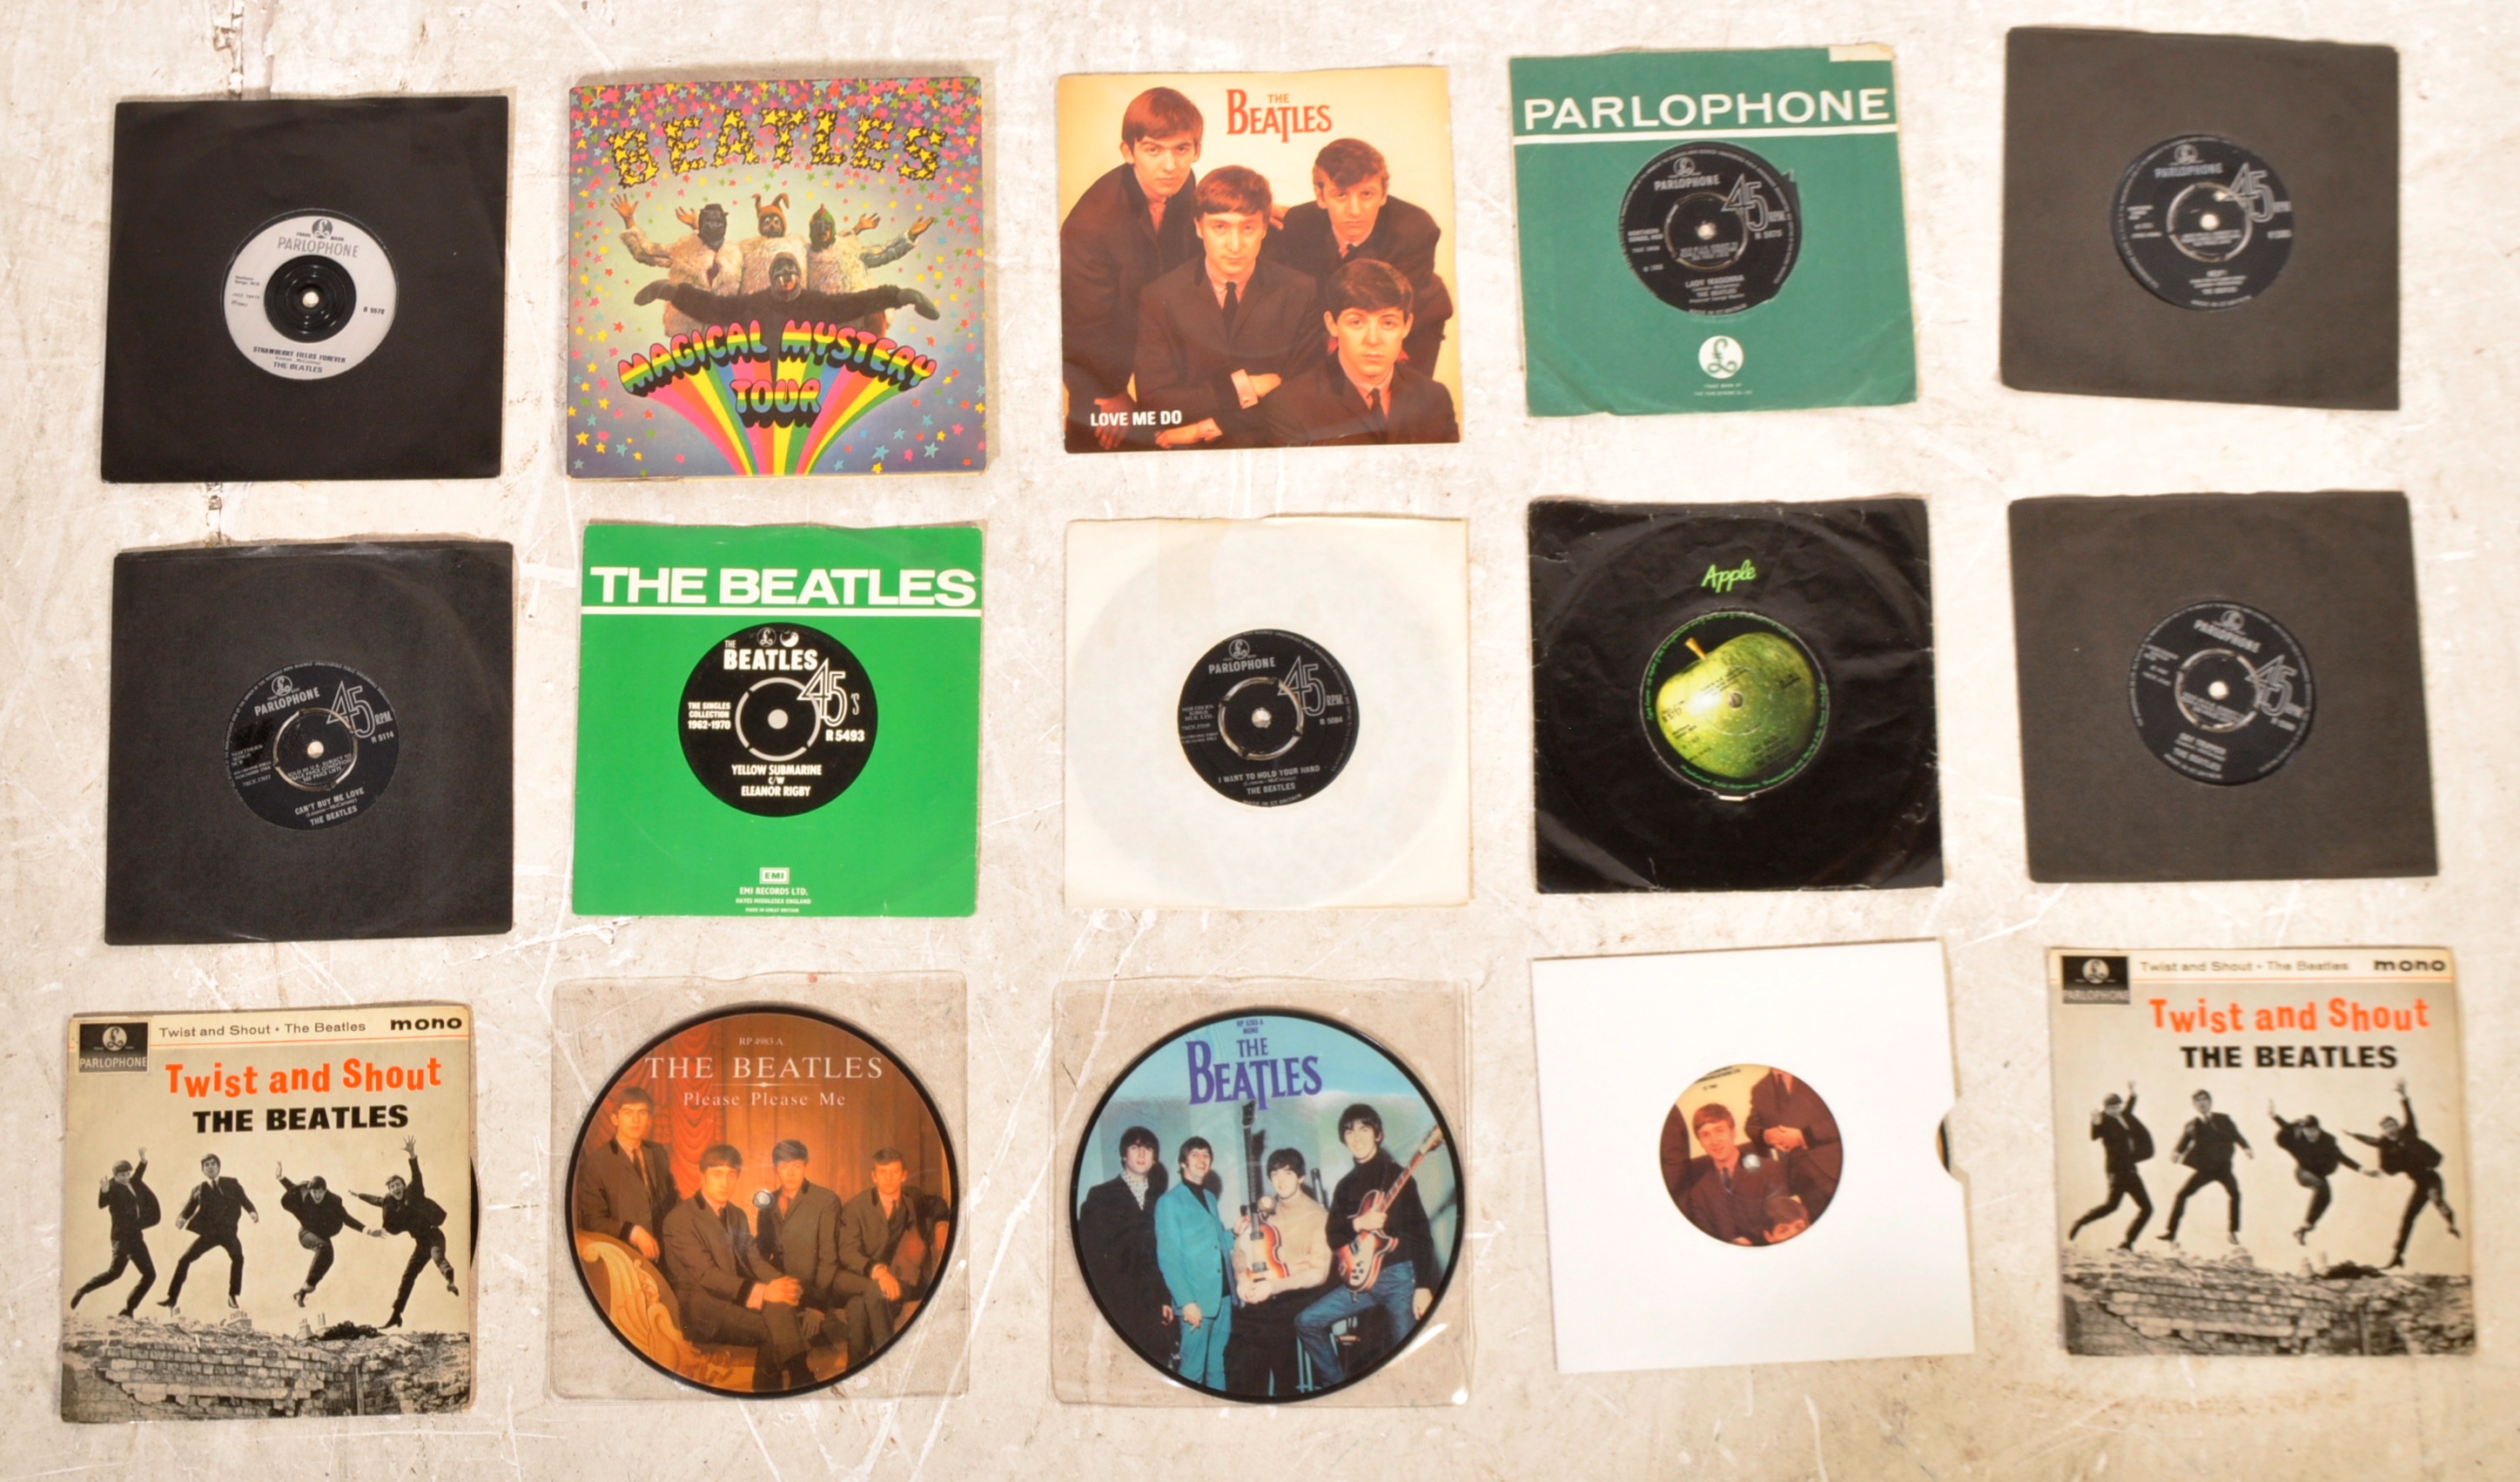 THE BEATLES - SLECTION OF 45RPM 7" VINYL SINGLES - Image 3 of 5